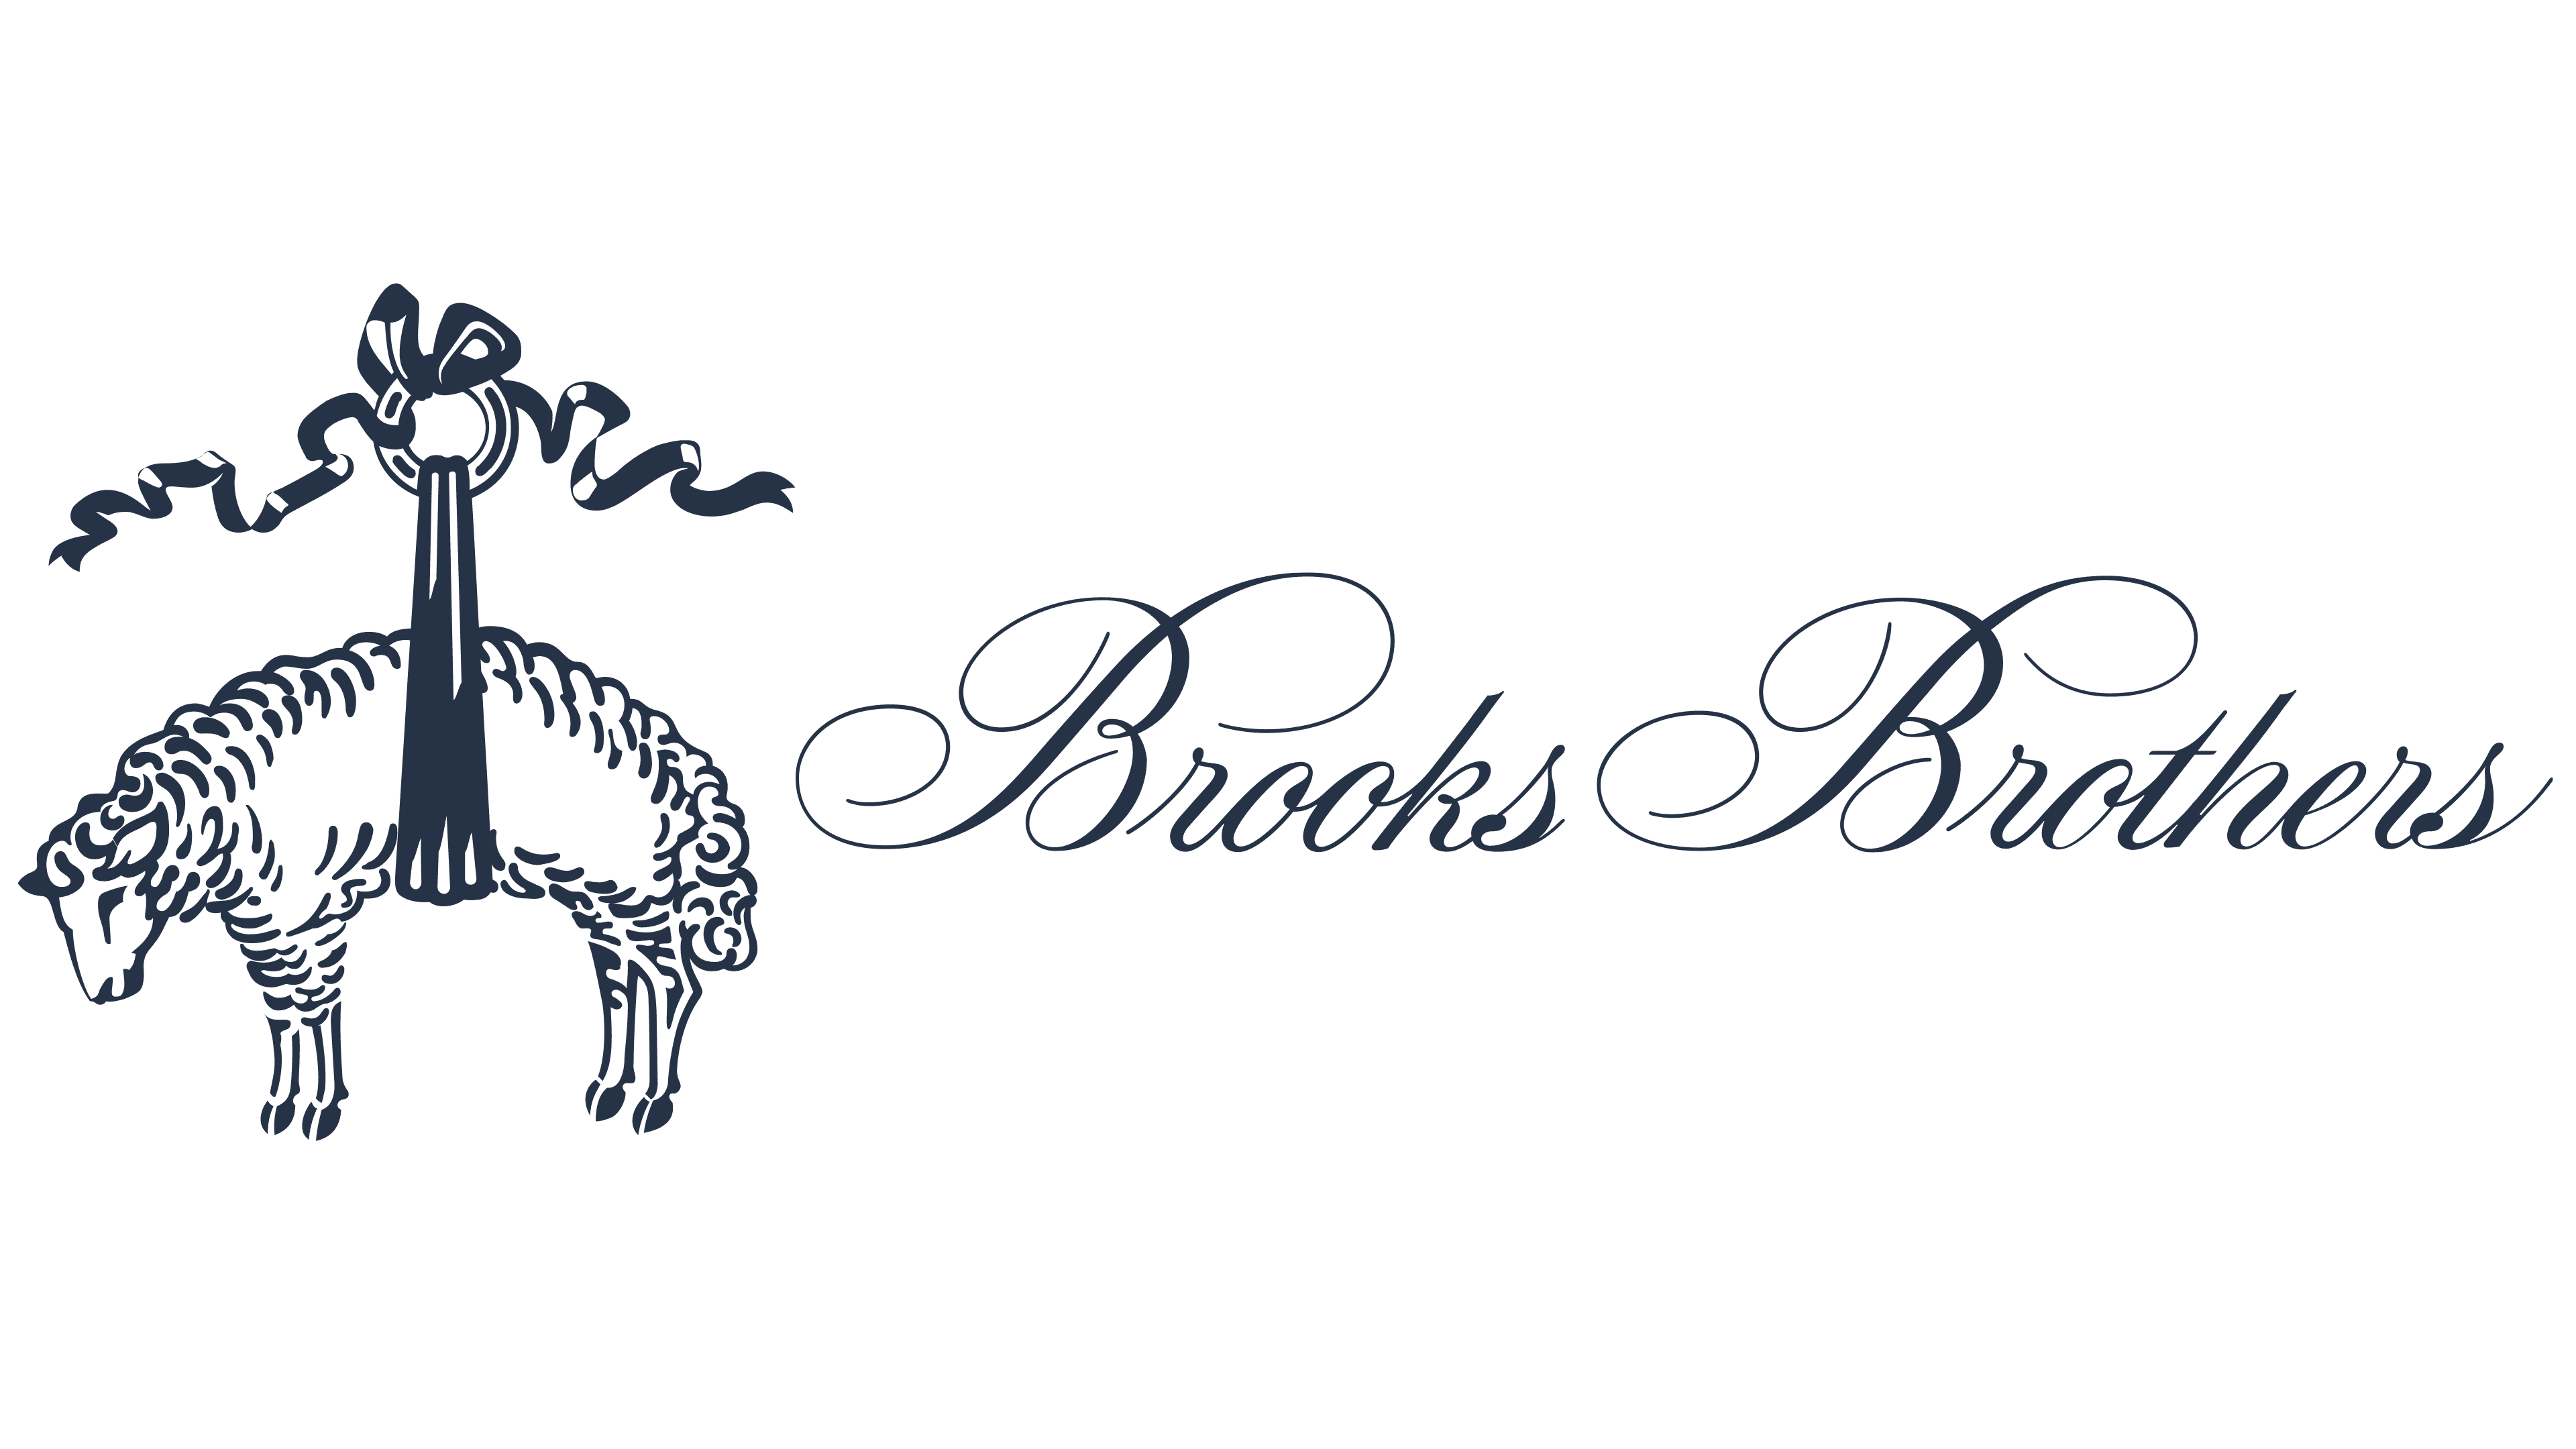 brookes brothers logo